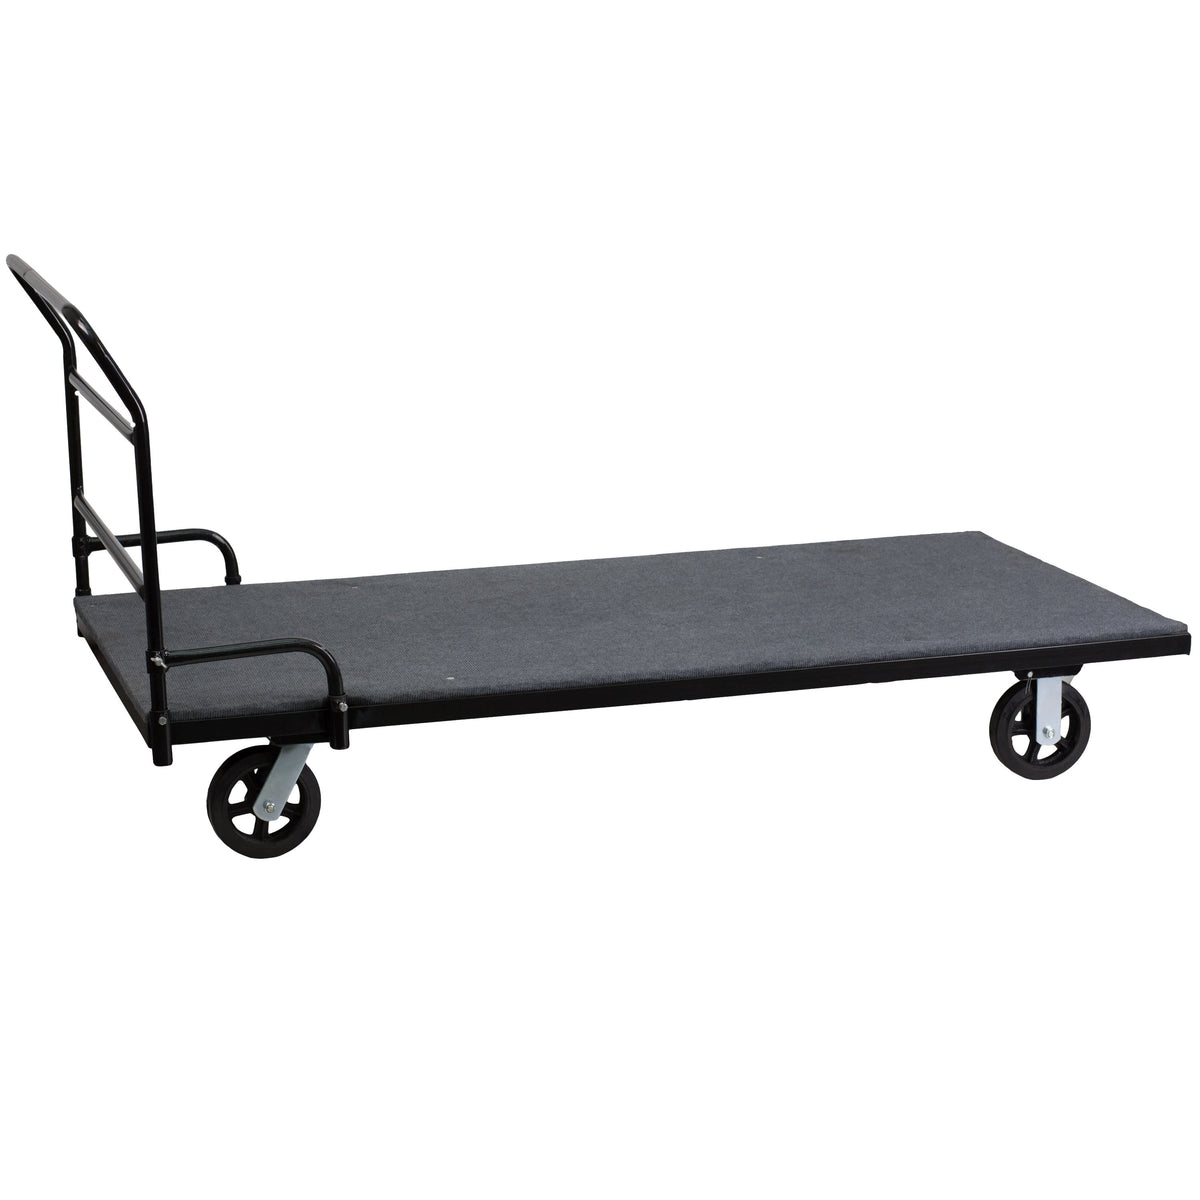 Folding Table Dolly with Carpeted Platform for Rectangular Tables